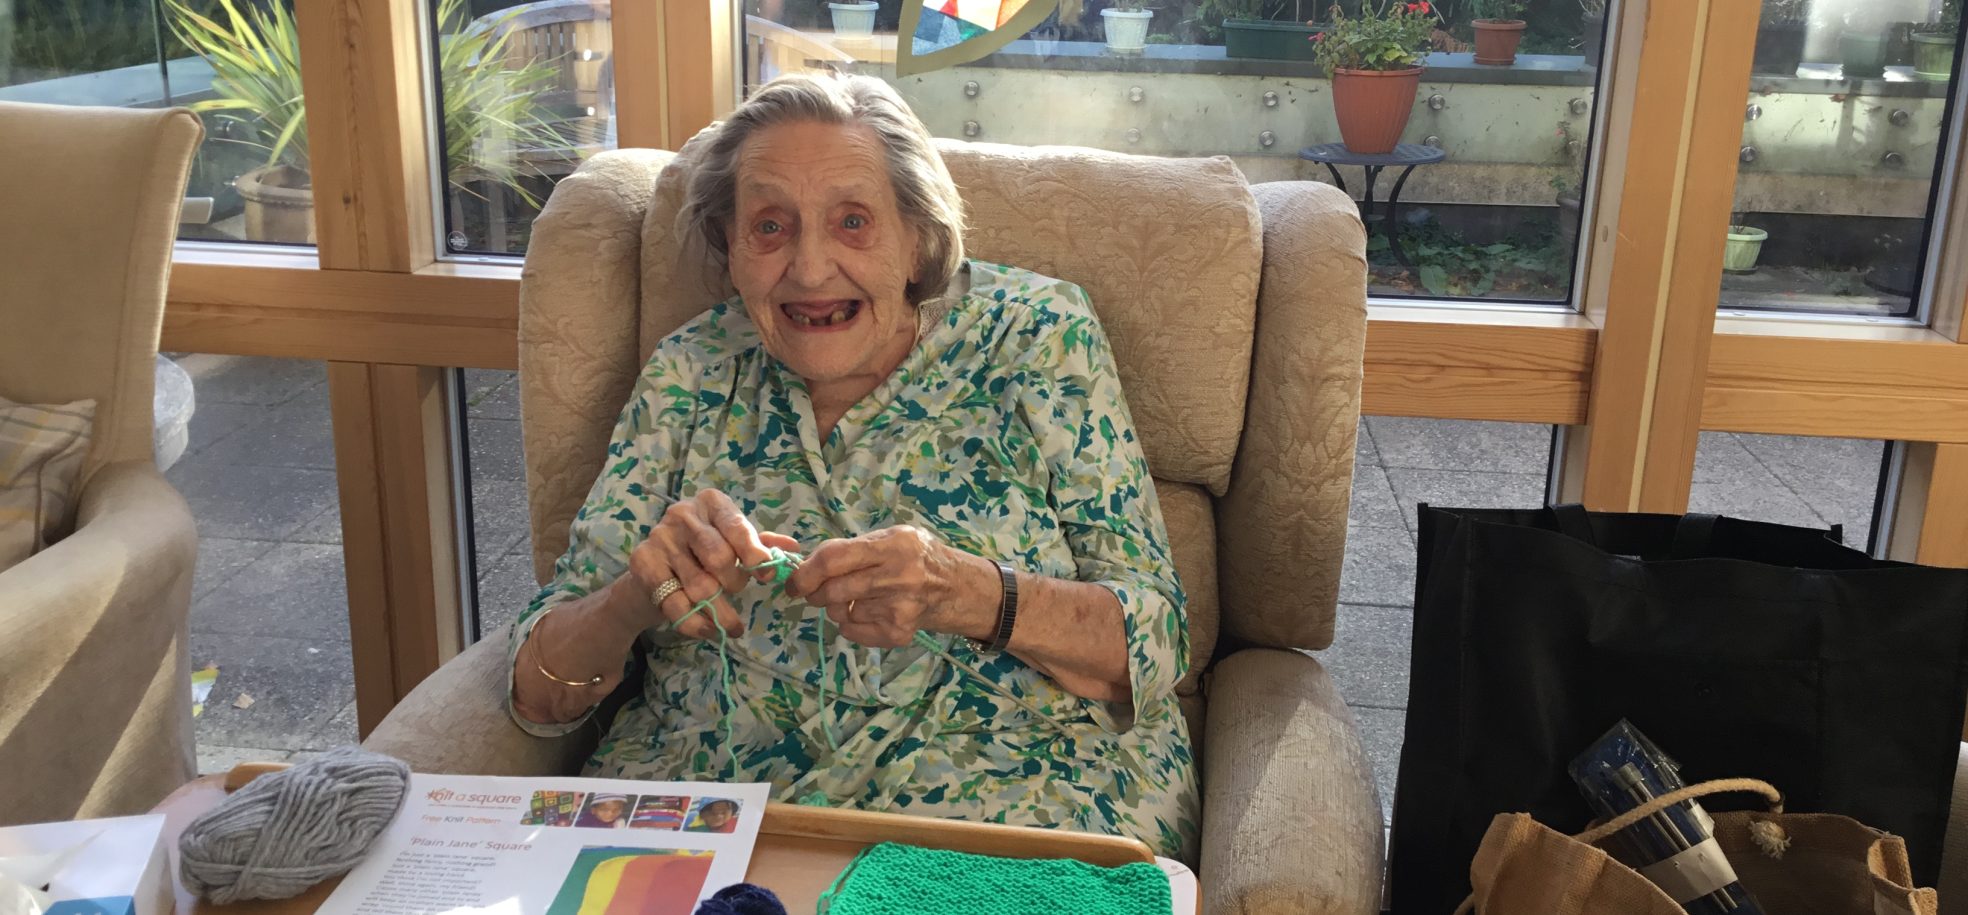 98 year old resident Marian Royston at James Terry Court in South Croydon gets knitting for charity